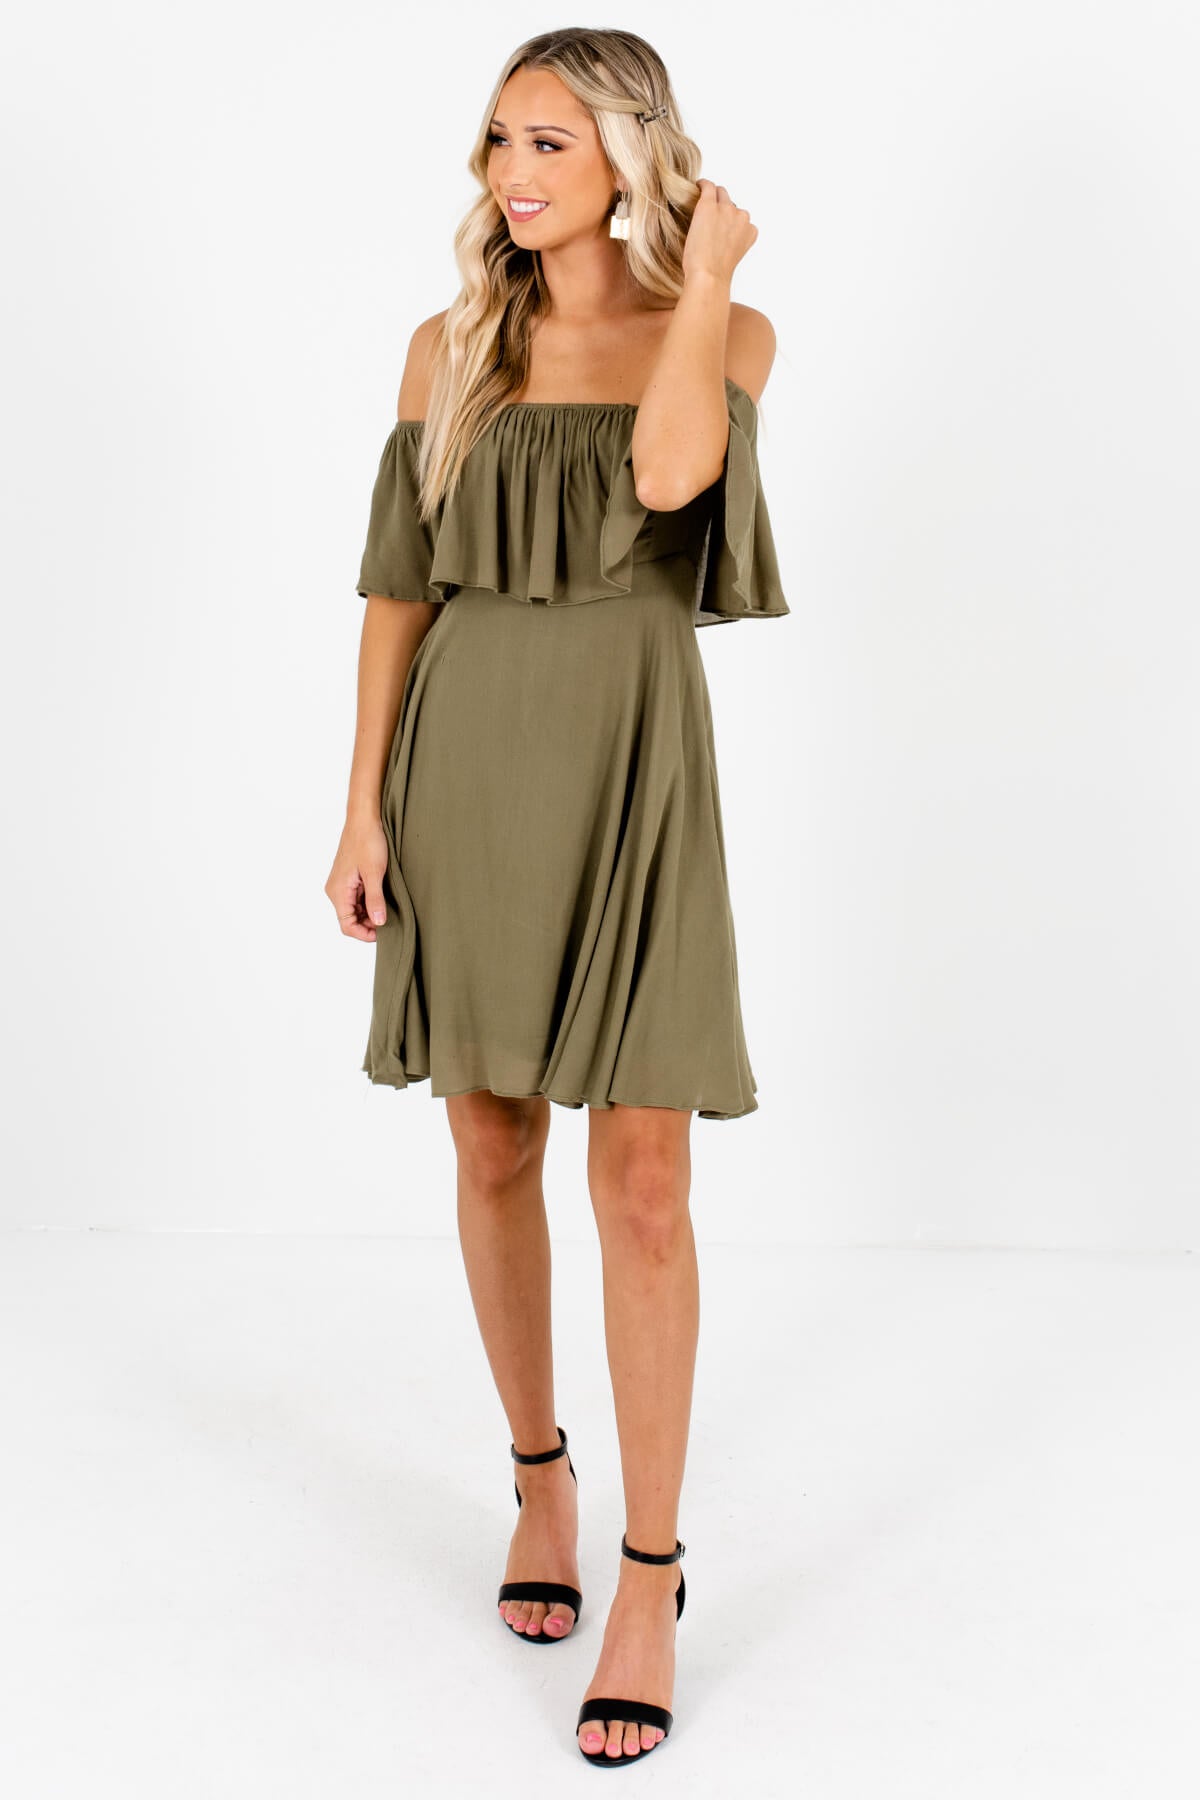 Olive Green Cute and Comfortable Boutique Mini Dresses for Women